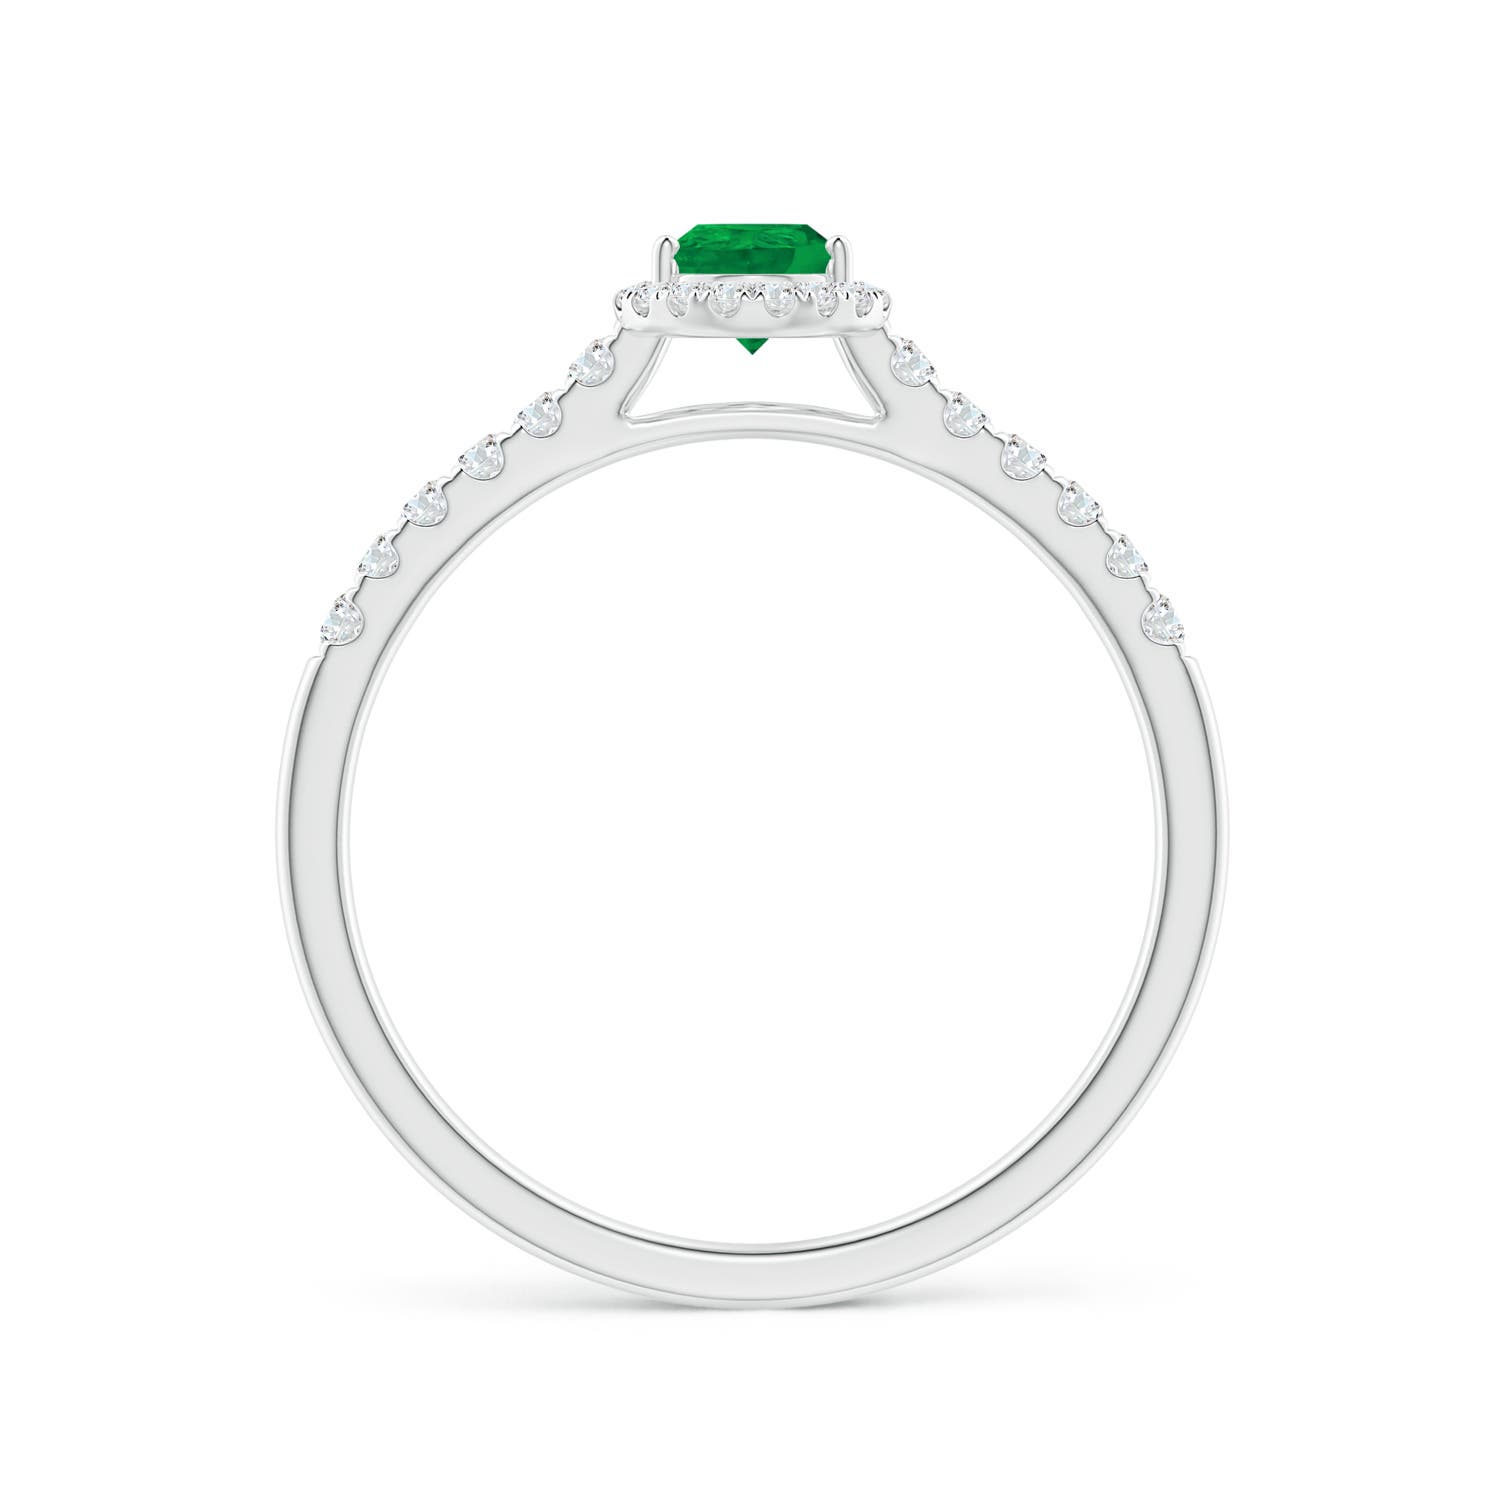 AA - Emerald / 0.56 CT / 14 KT White Gold